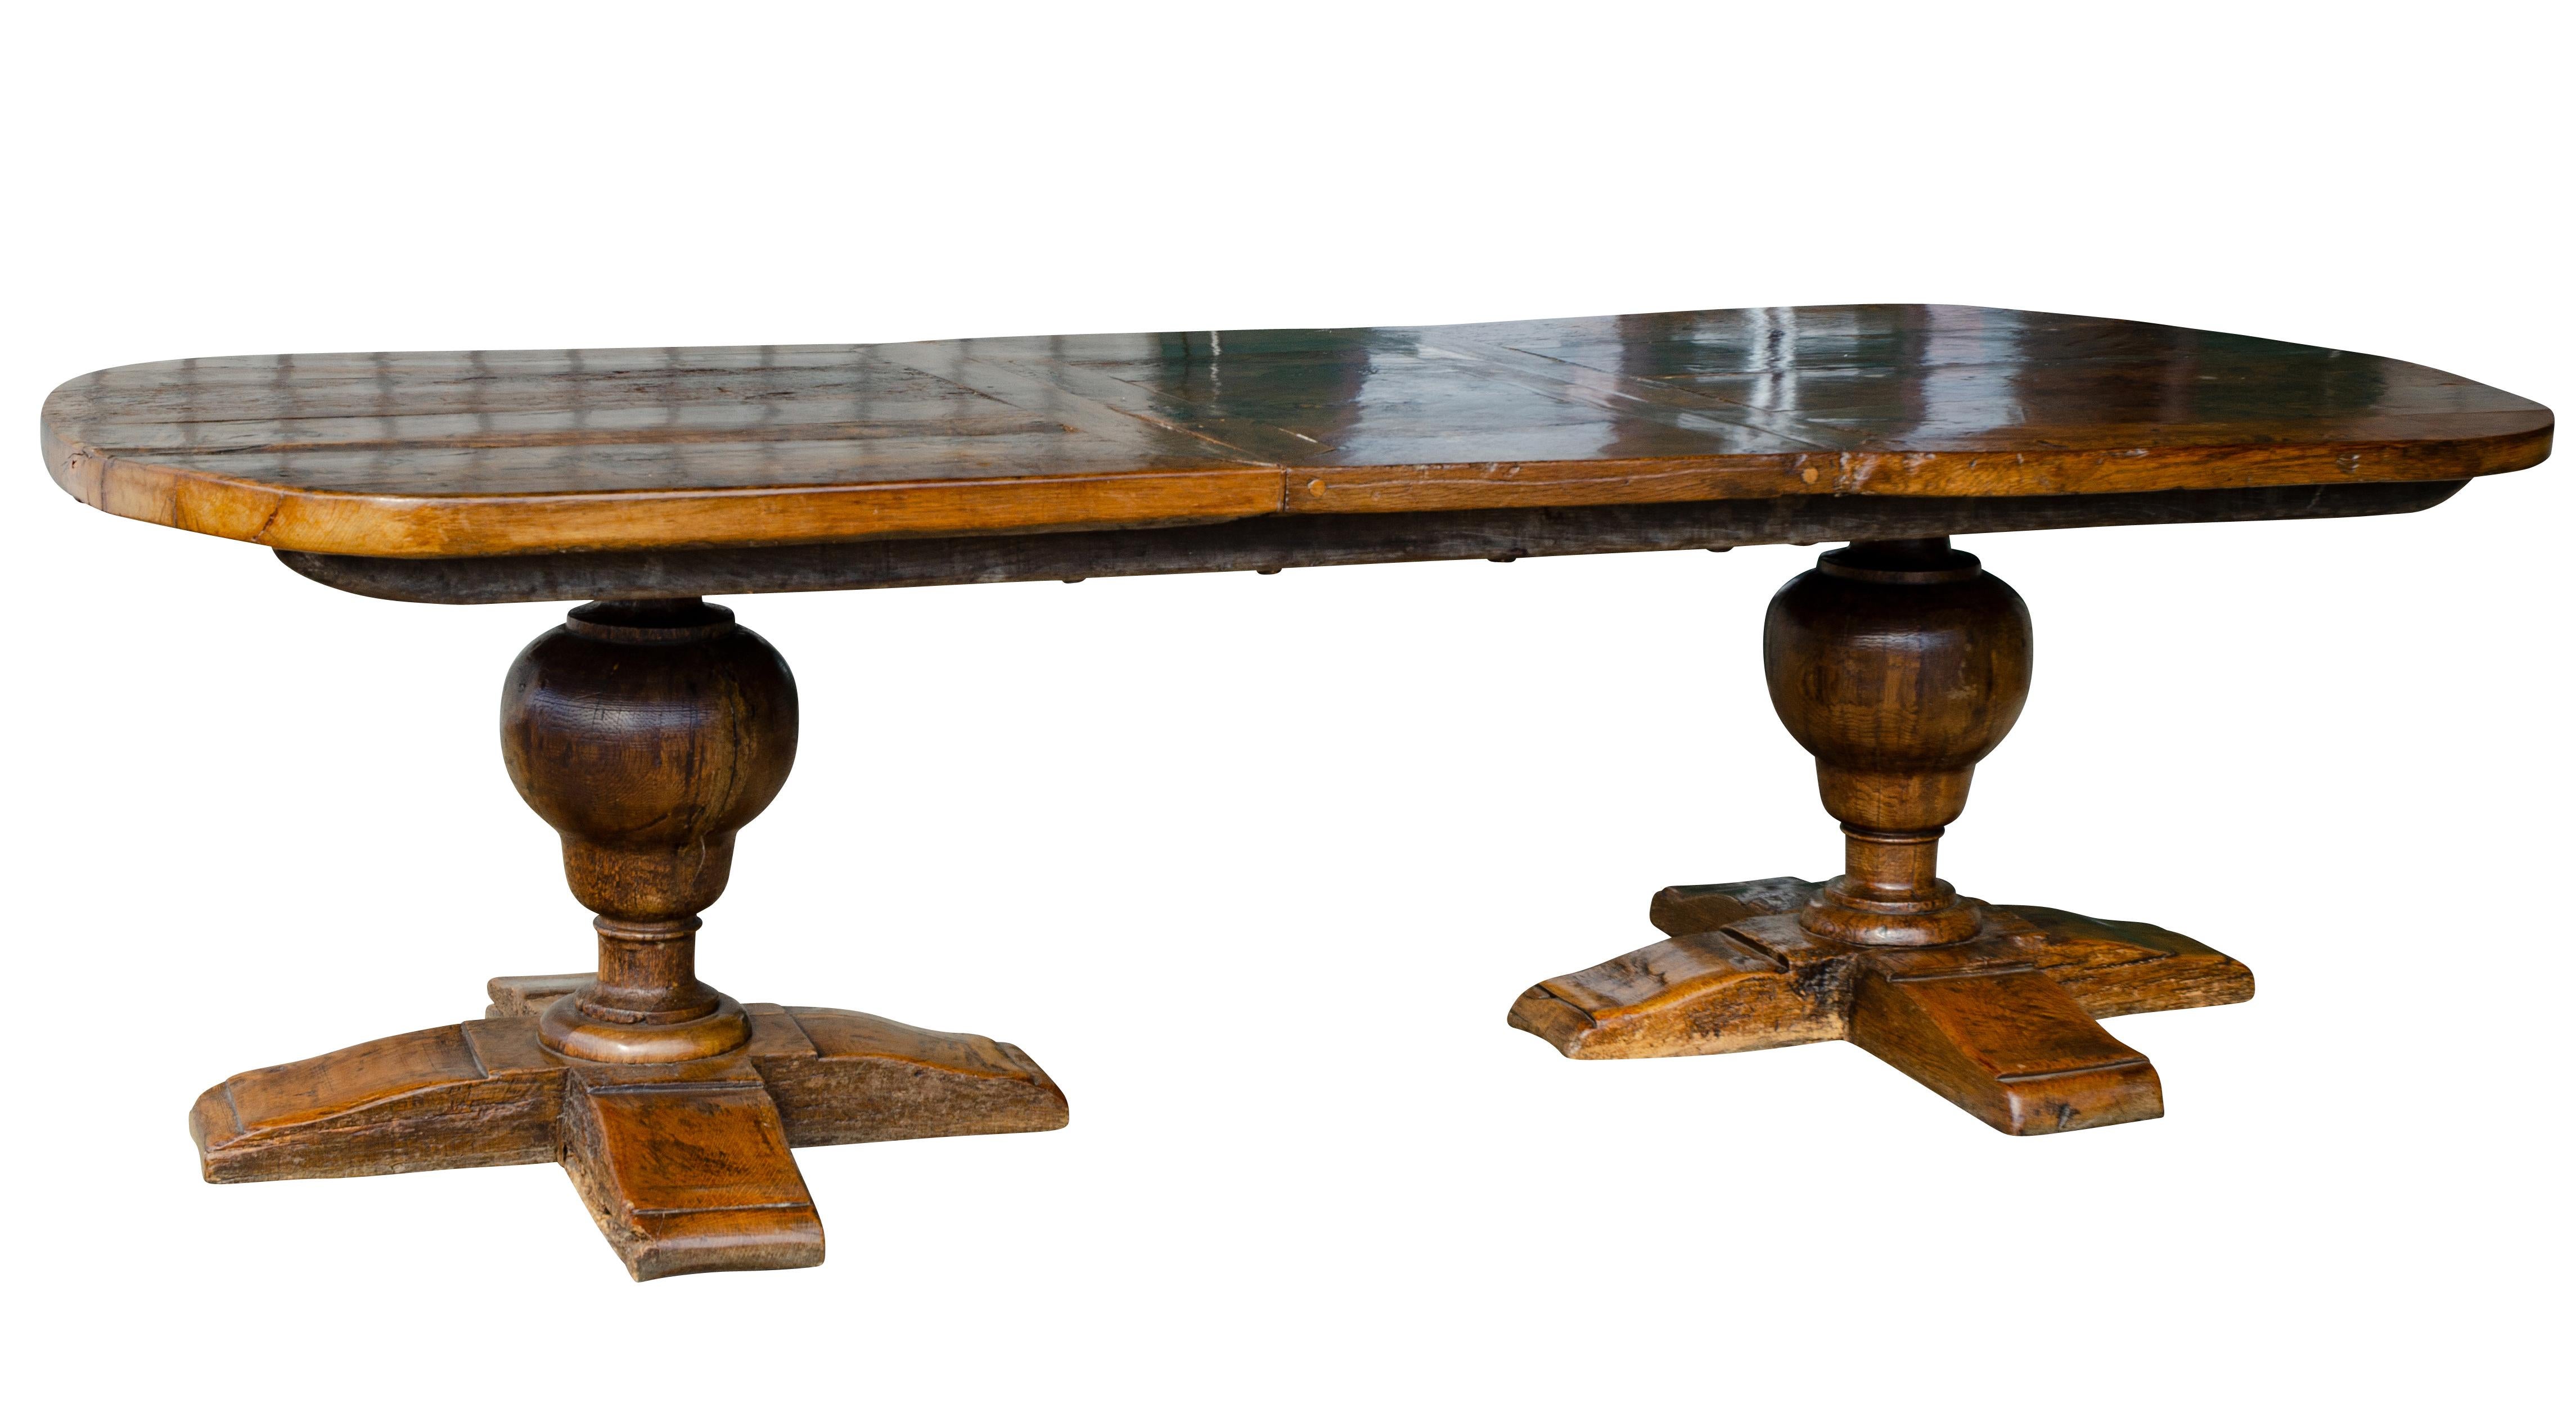 Constructed of early elements. Thick top assembled in three sections dowelled together. Bulbous turned supports and four part molded plank feet. Provenance, Davidson Antiques, Jermyn St, London.